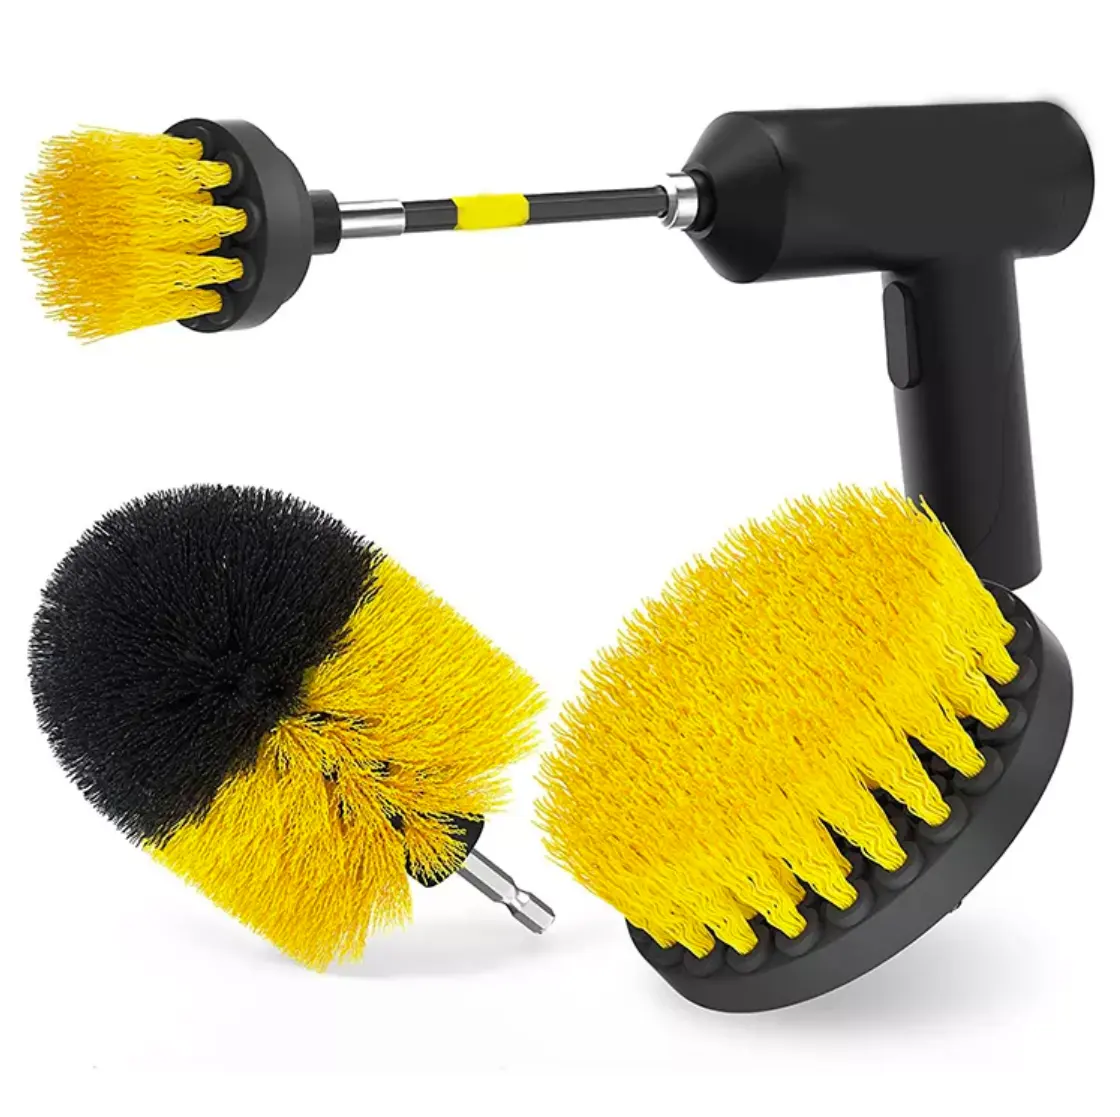 Electric Scrubbing Drill Cleaning Brush Set For Drill